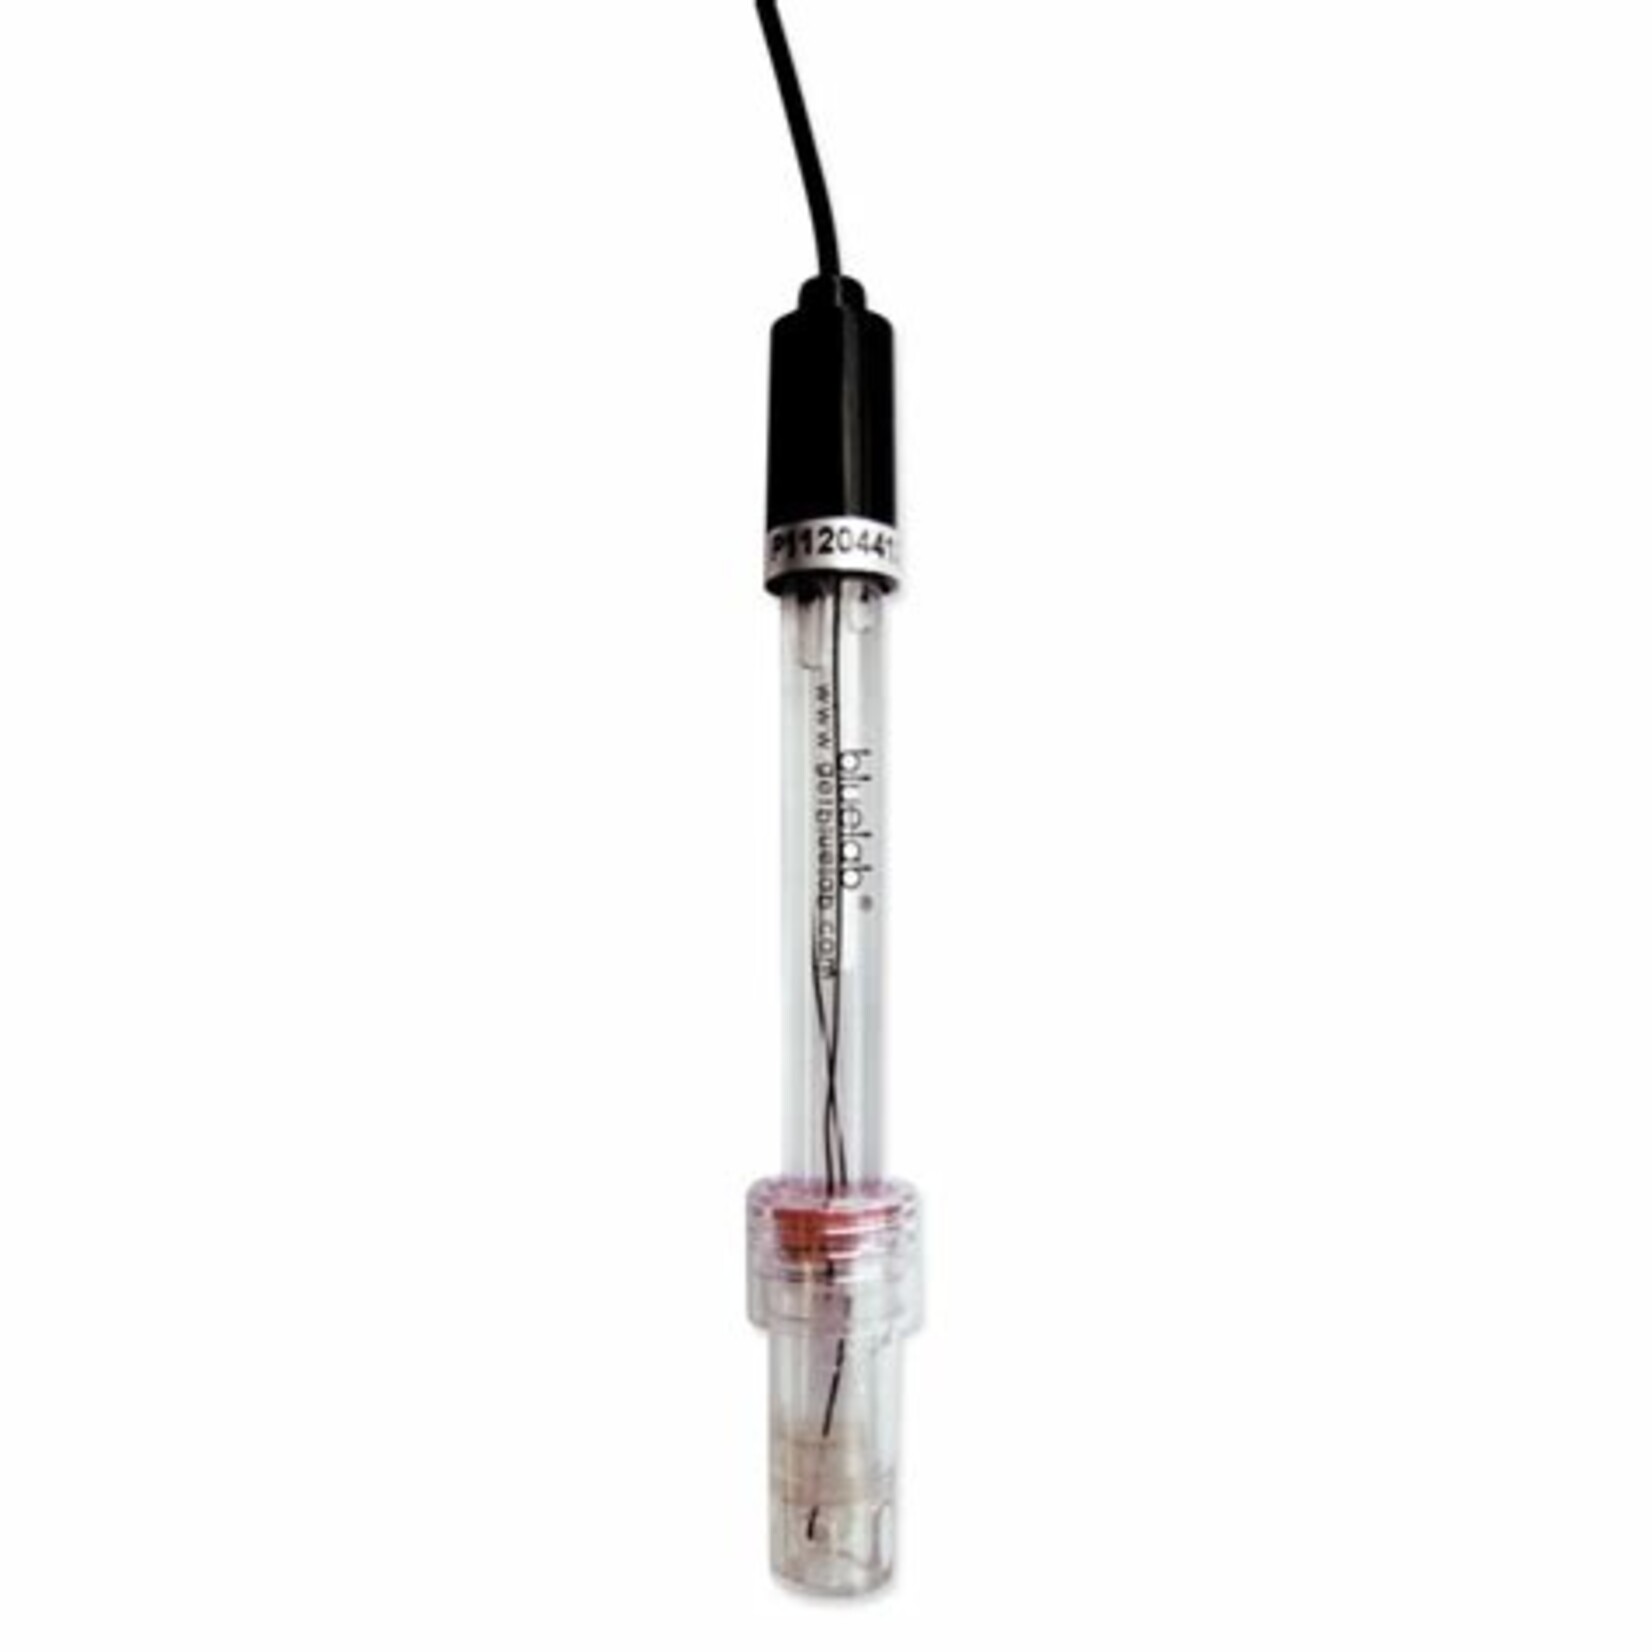 Bluelab Bluelab pH Replacement Electrode for Combo & pH Meter probe